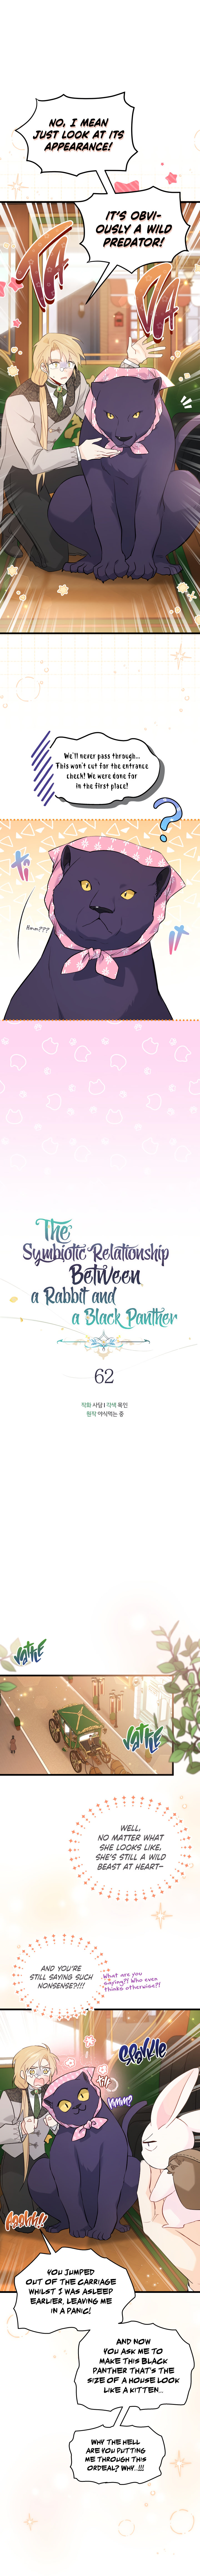 The Symbiotic Relationship Between A Rabbit and A Black Panther - Chapter 62 Page 4